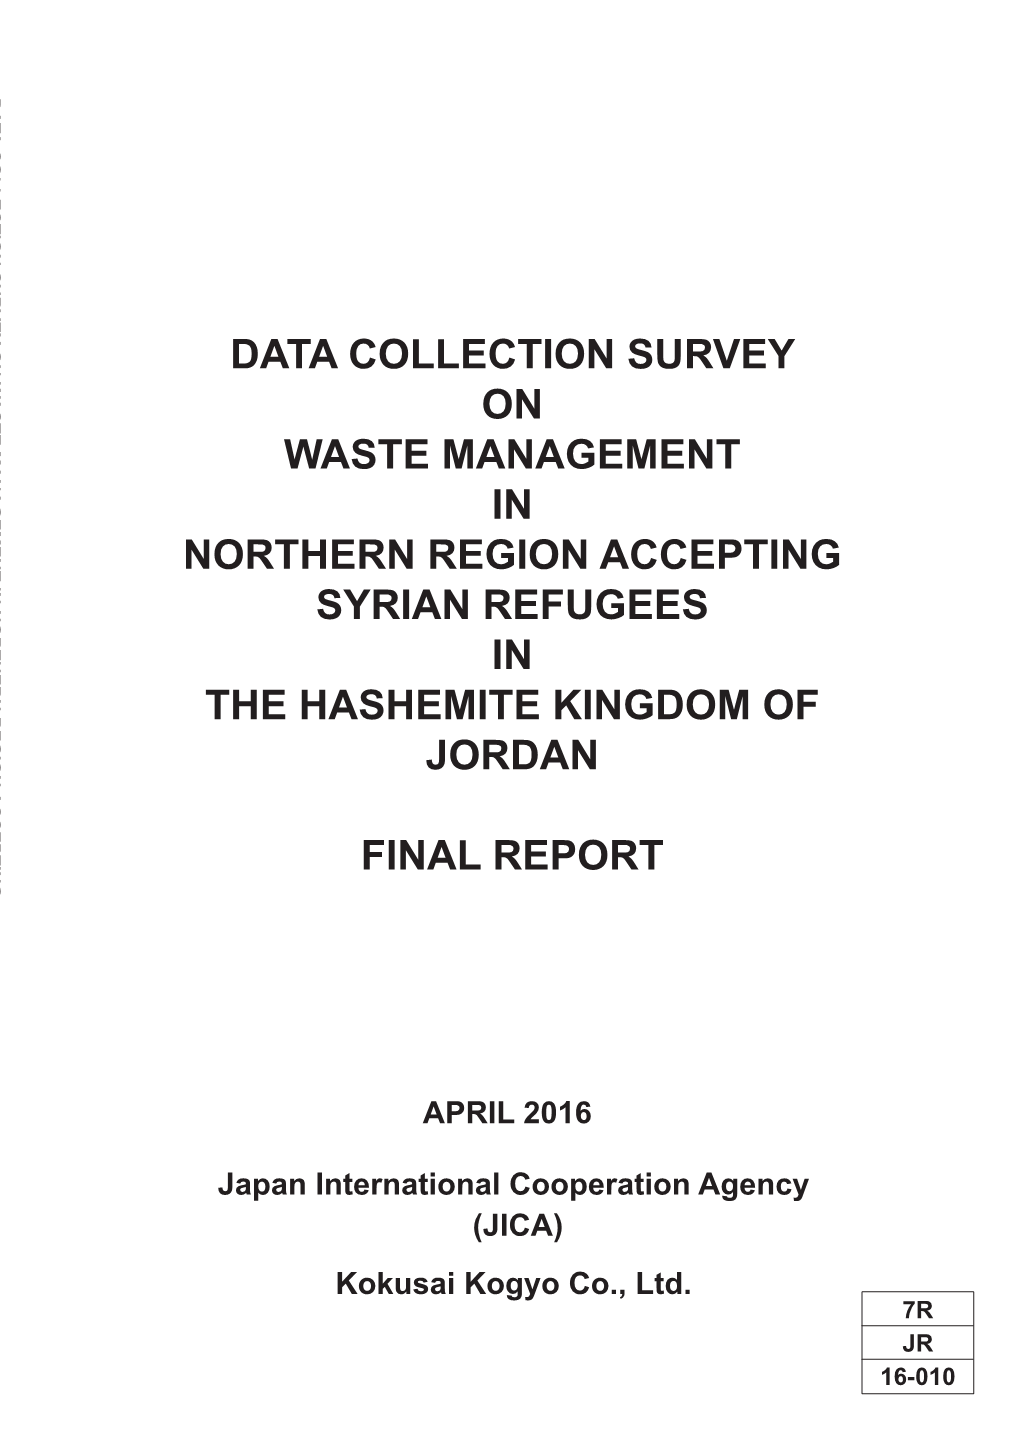 Data Collection Survey on Waste Management in Northern Region Accepting